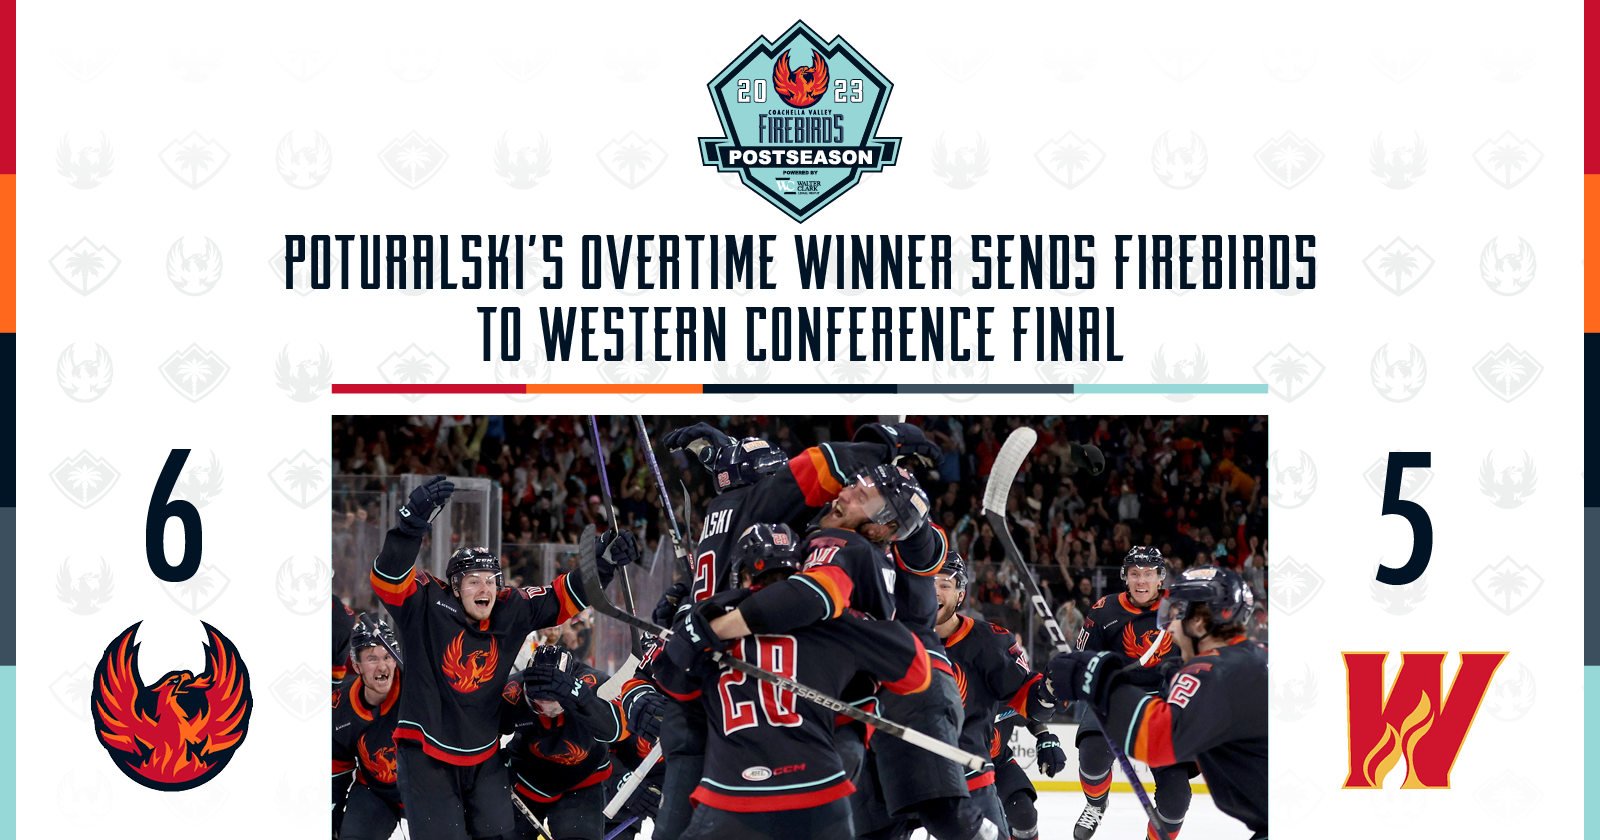 Coachella Valley Firebirds are going to the Western Conference